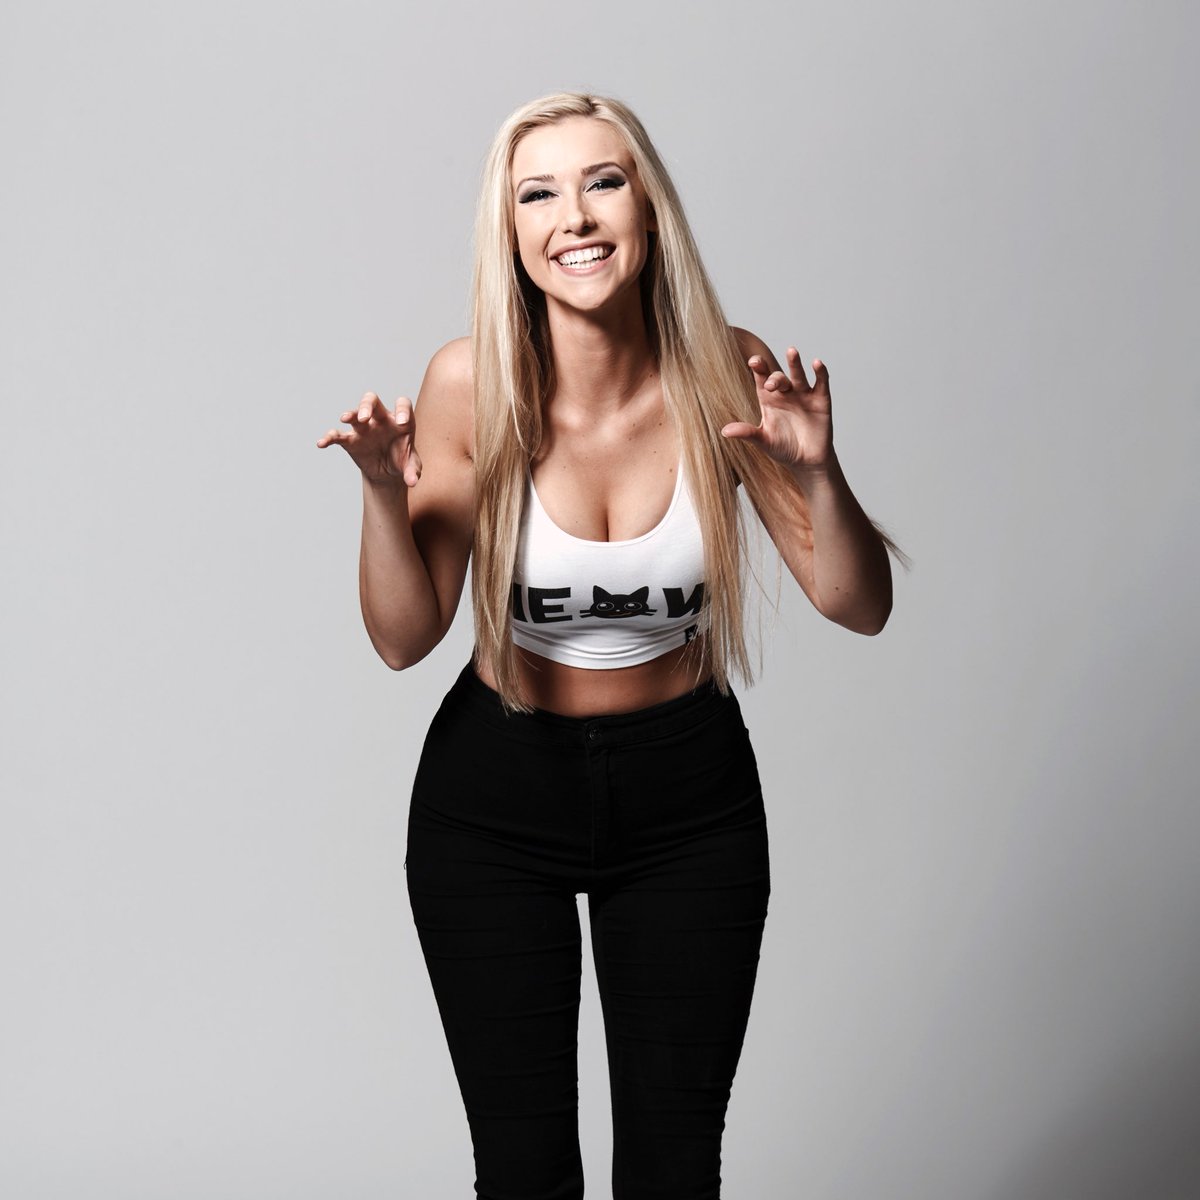 21-captivating-facts-about-noelle-foley